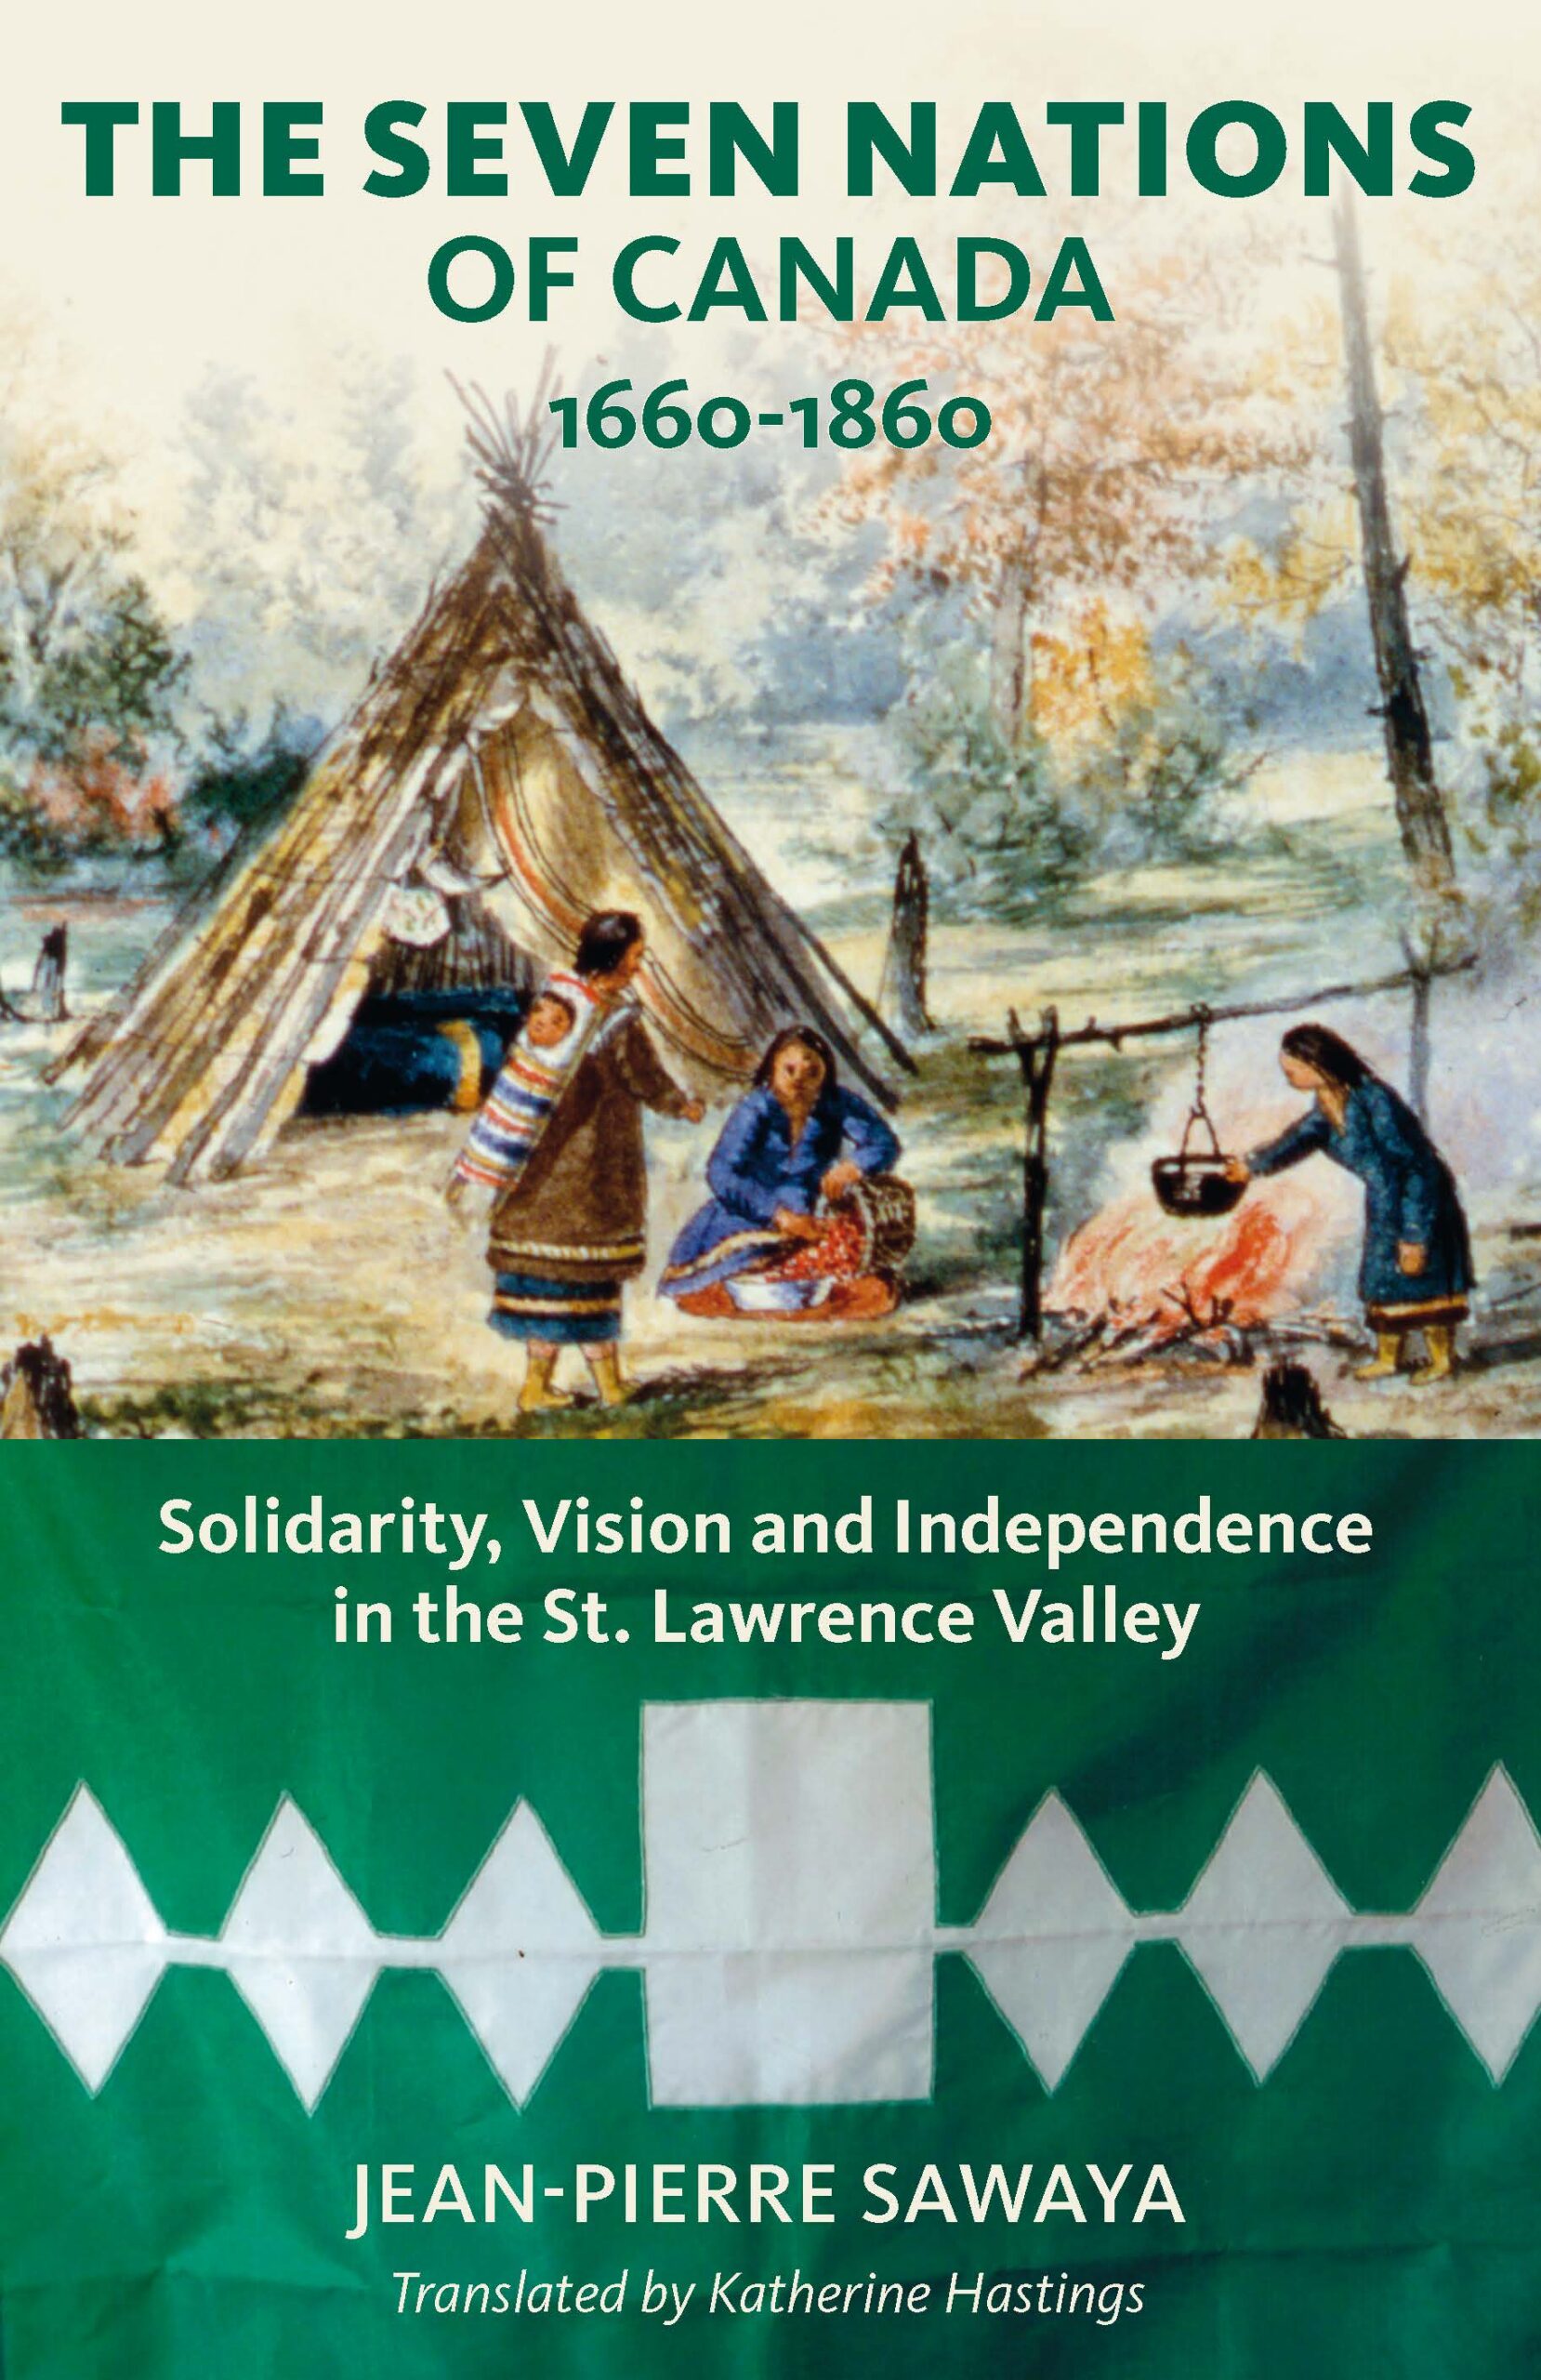 The Seven Nations of Canada 1660-1860: Solidarity, Vision and Independence in the St. Lawrence Valley